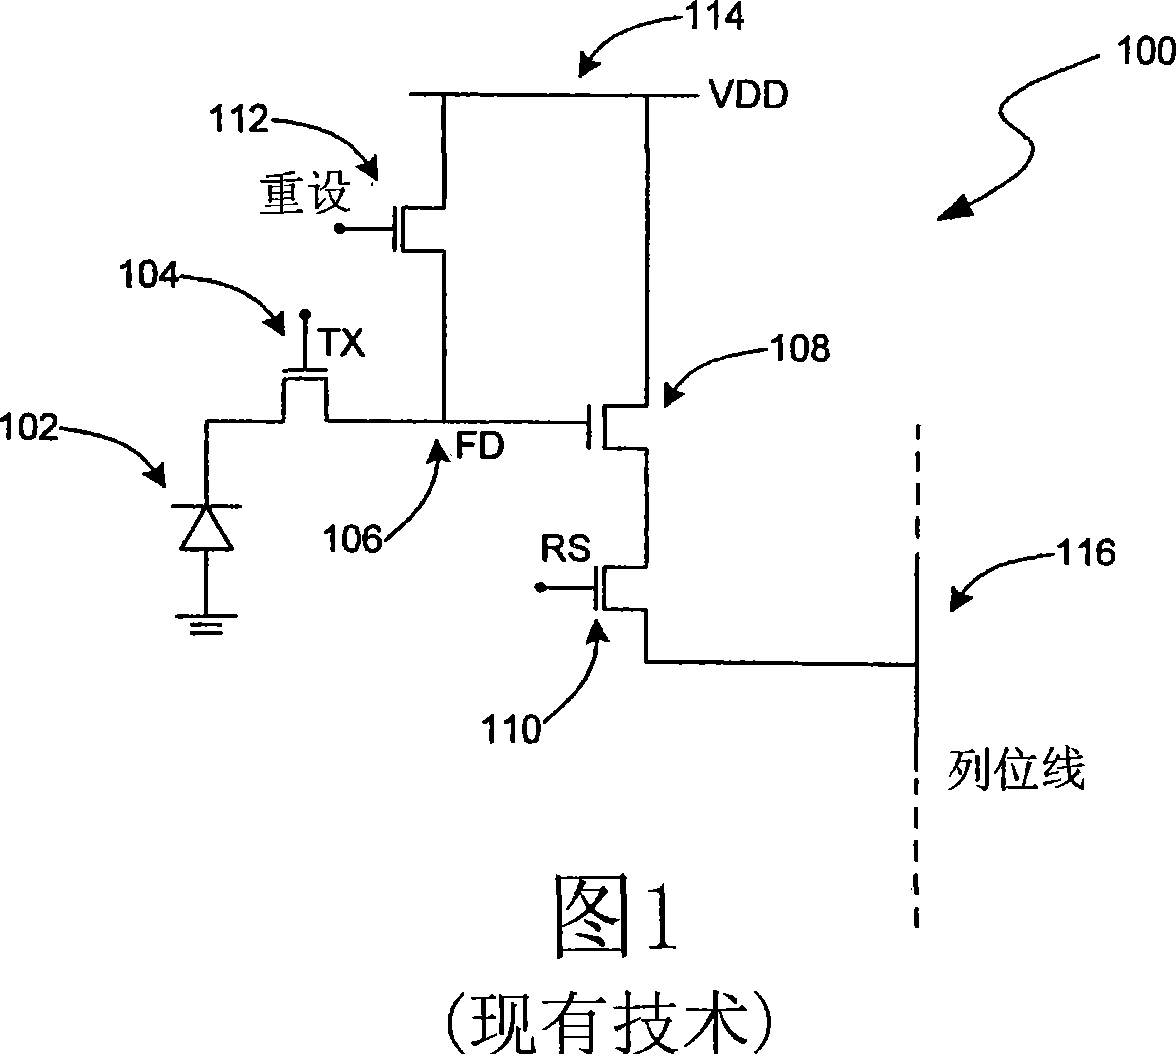 Image sensors with output noise reduction mechanisms